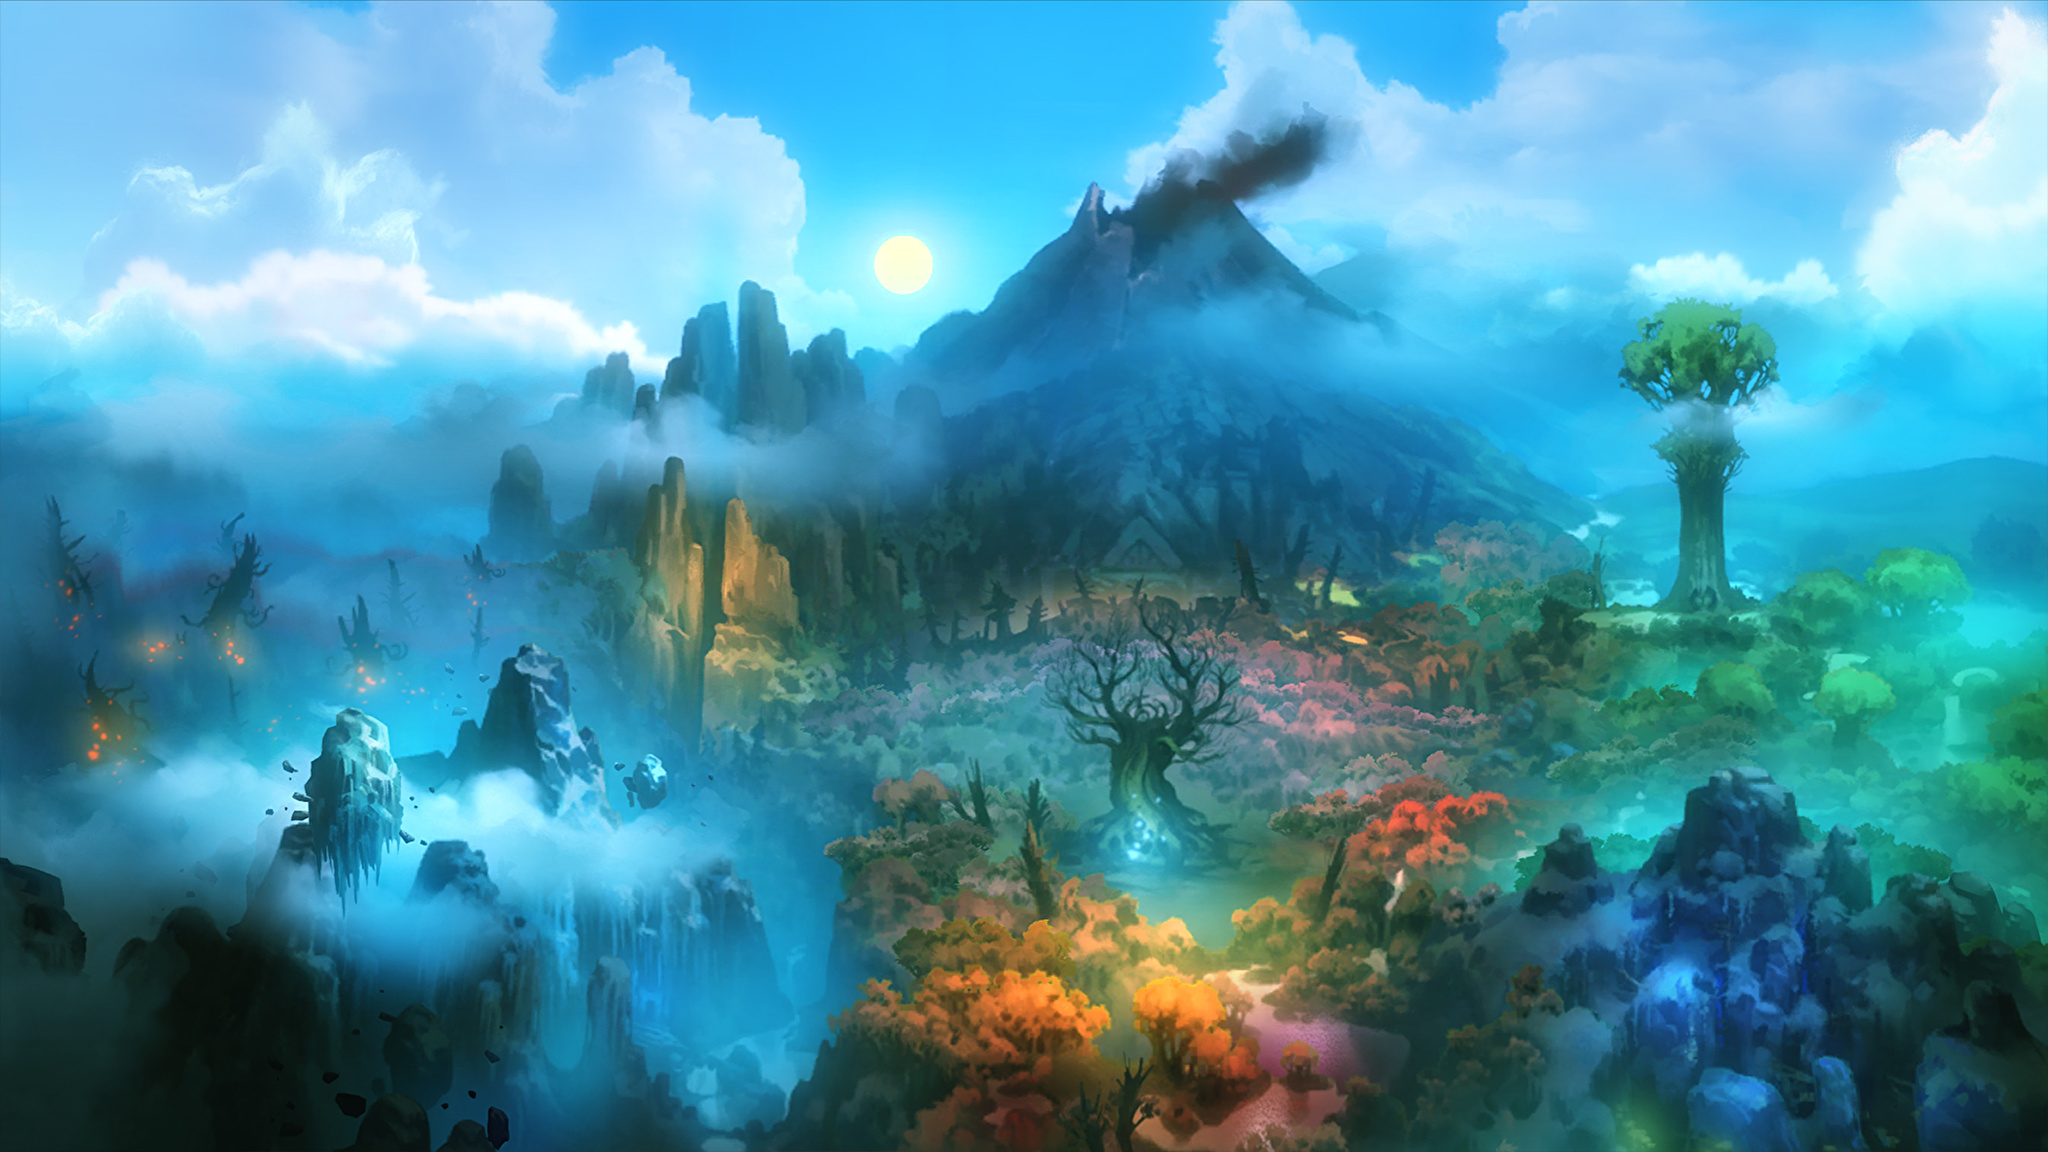 Fantasy world 3. Ori and the Blind Forest. Ori and the Blind Forest 2. Ori and the will of the Wisps. Ori and the Blind Forest фон.